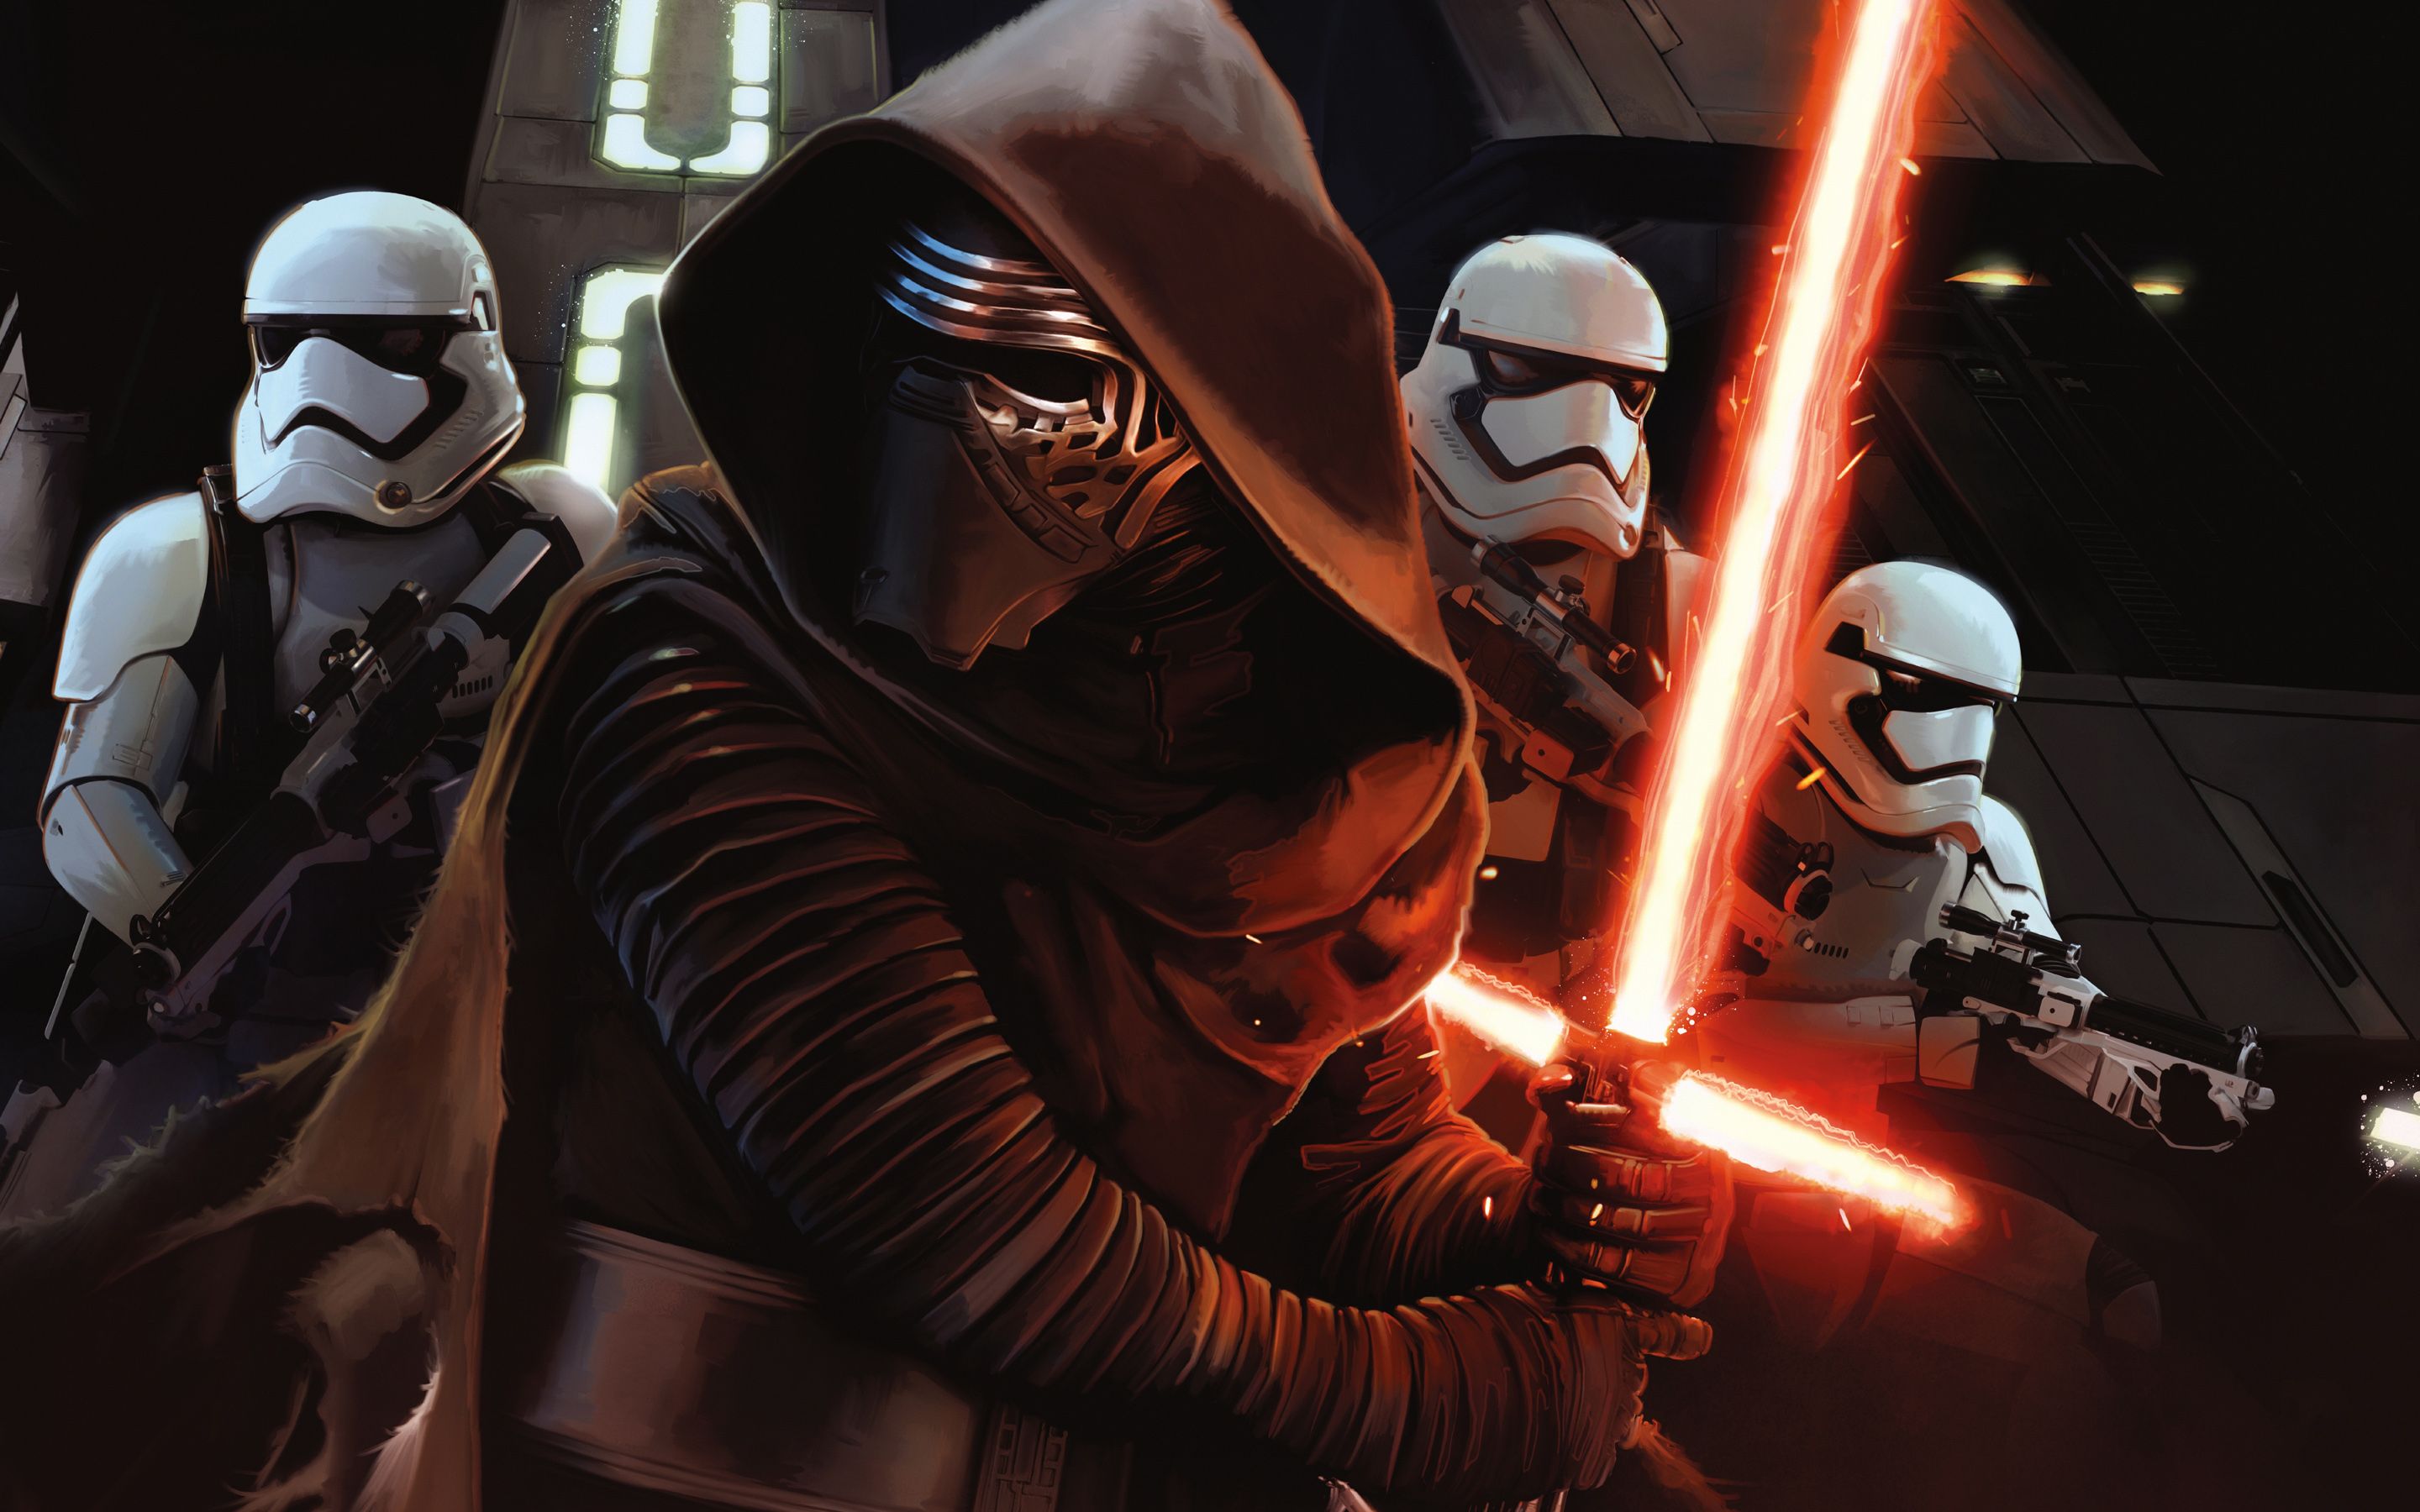 Review of ‘Star Wars: The Force Awakens’ …. NO PLOT SPOILERS!